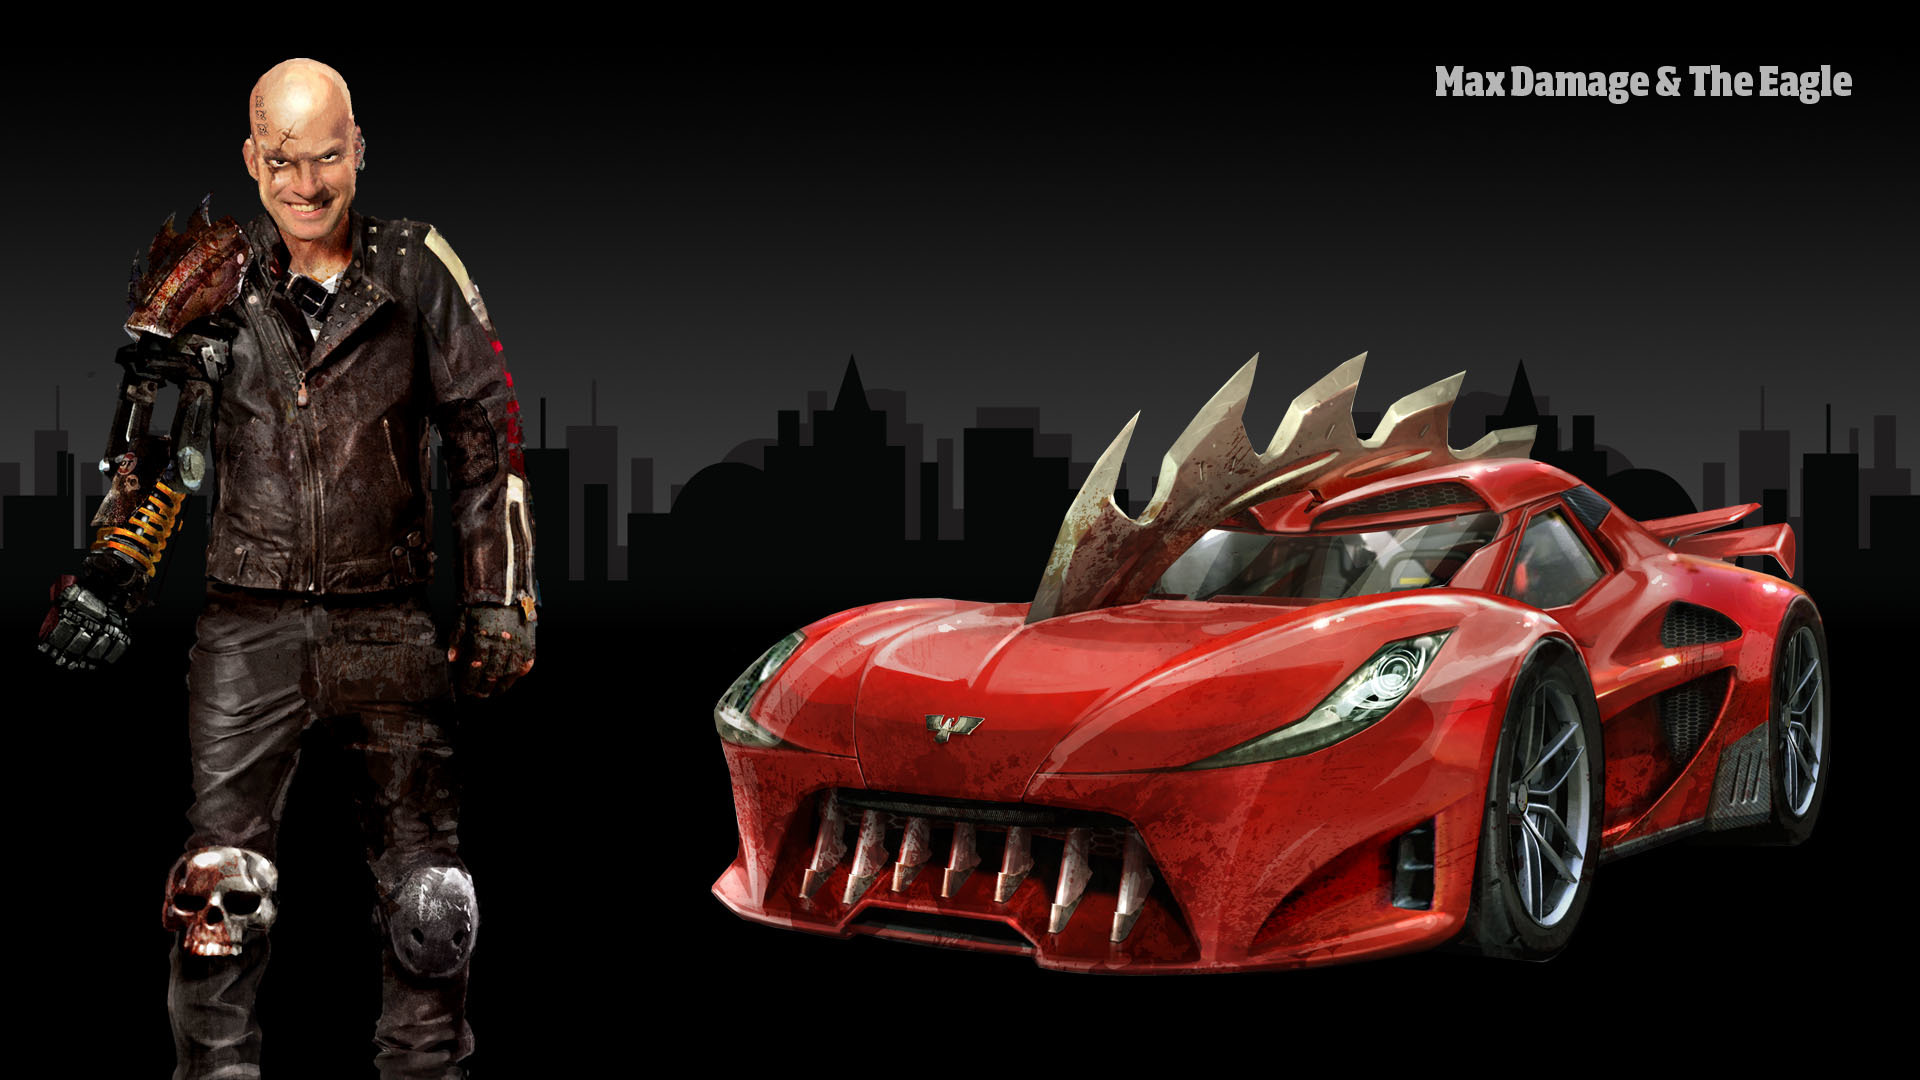 Download wallpaper The game, People, Car, Carmageddon Reincarnation, Max Damage, The Game, The Eagle, section games in resolution 1920x1080